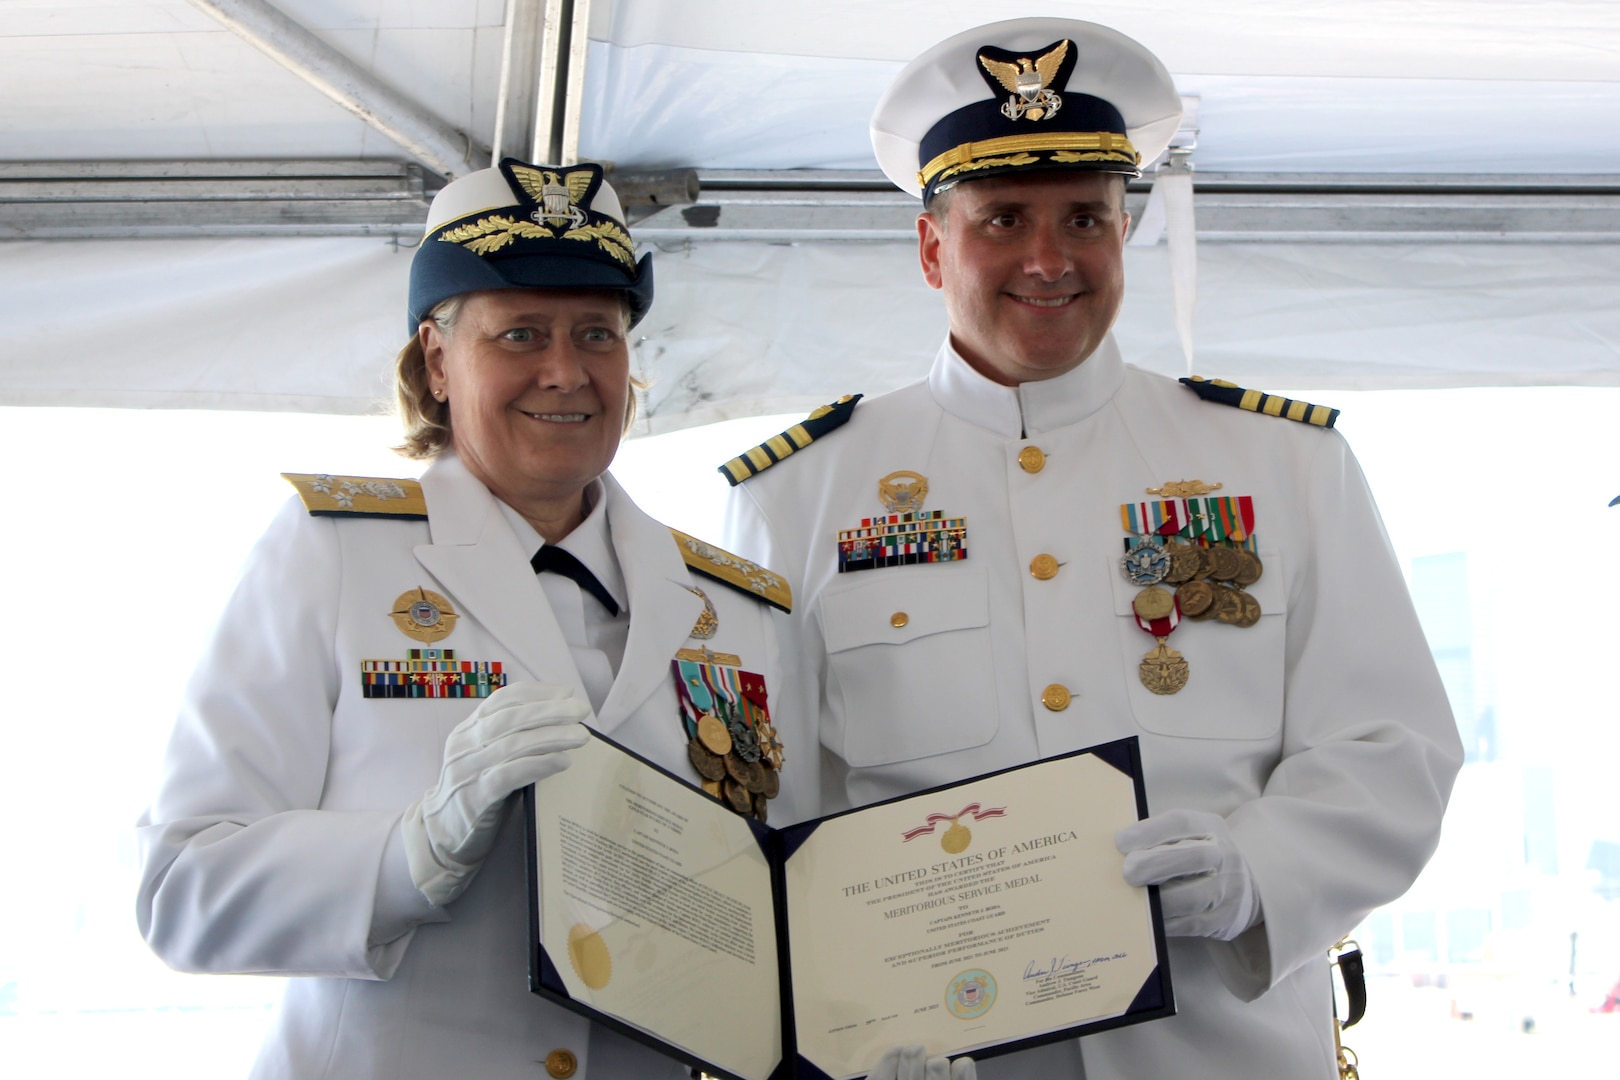 Adm. Linda Fagan, commandant of the U.S. Coast Guard, presents Capt. Kenneth Boda, commanding officer of Coast Guard Cutter Healy (WAGB 20), with a Meritorious Service Medal during a change of command ceremony, June 29, 2023, aboard Healy, at Base Seattle. Under Boda's command, the crew aboard Healy circumnavigated North America in 2021 and reached the North Pole in 2022, among other notable accomplishments. (U.S. Coast Guard photo by Petty Officer 2nd Class Michael Clark)